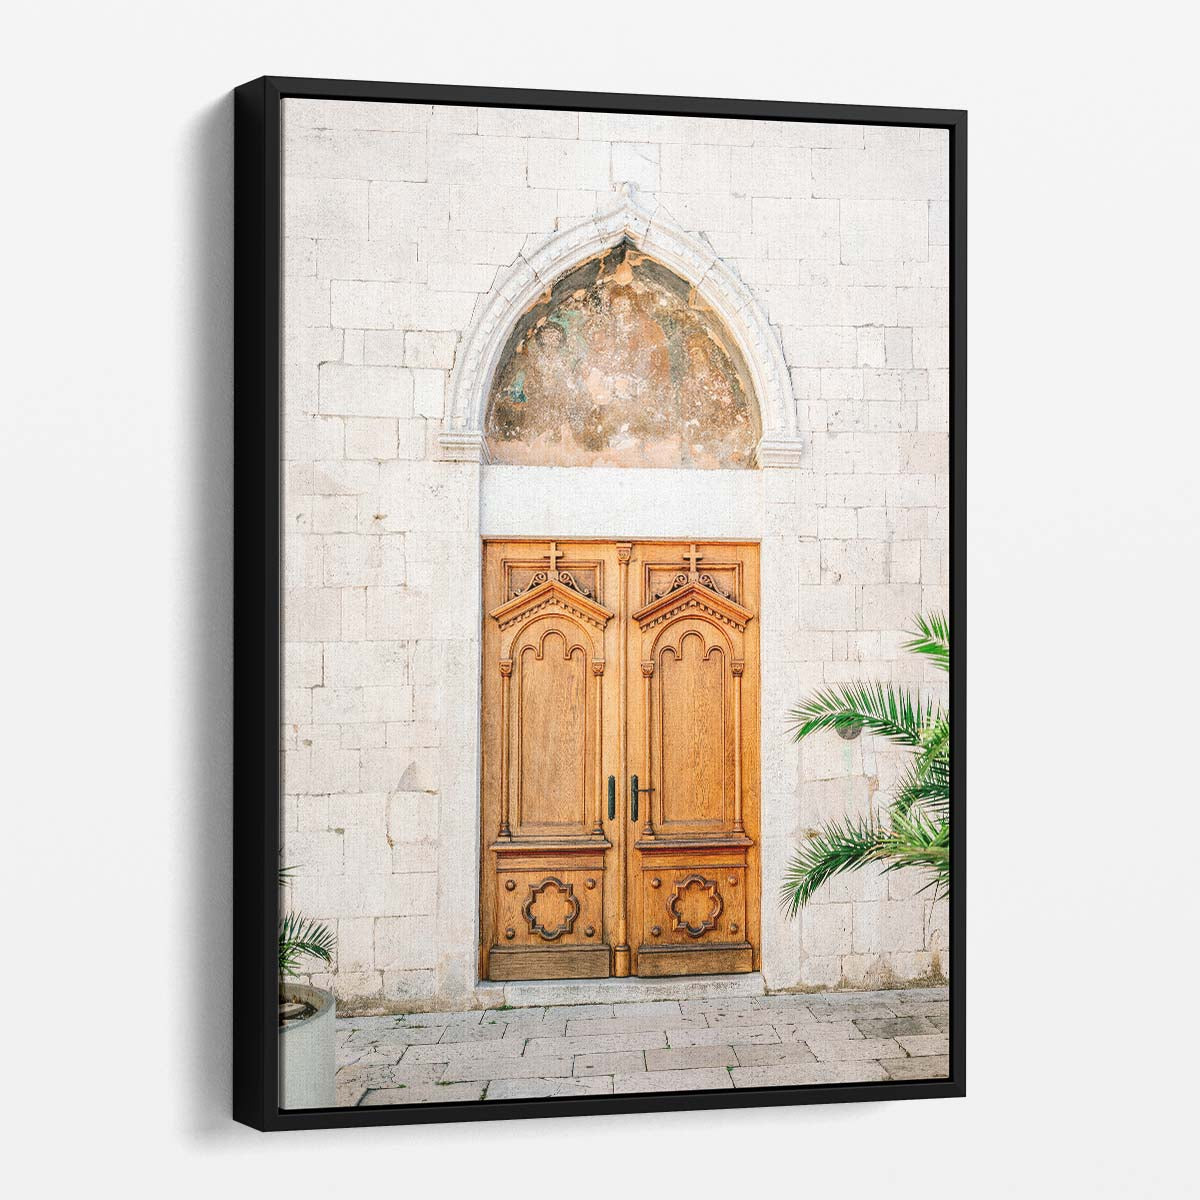 Croatian Church Doorway Photography, Beige Summer Cityscape Wall Art by Luxuriance Designs, made in USA